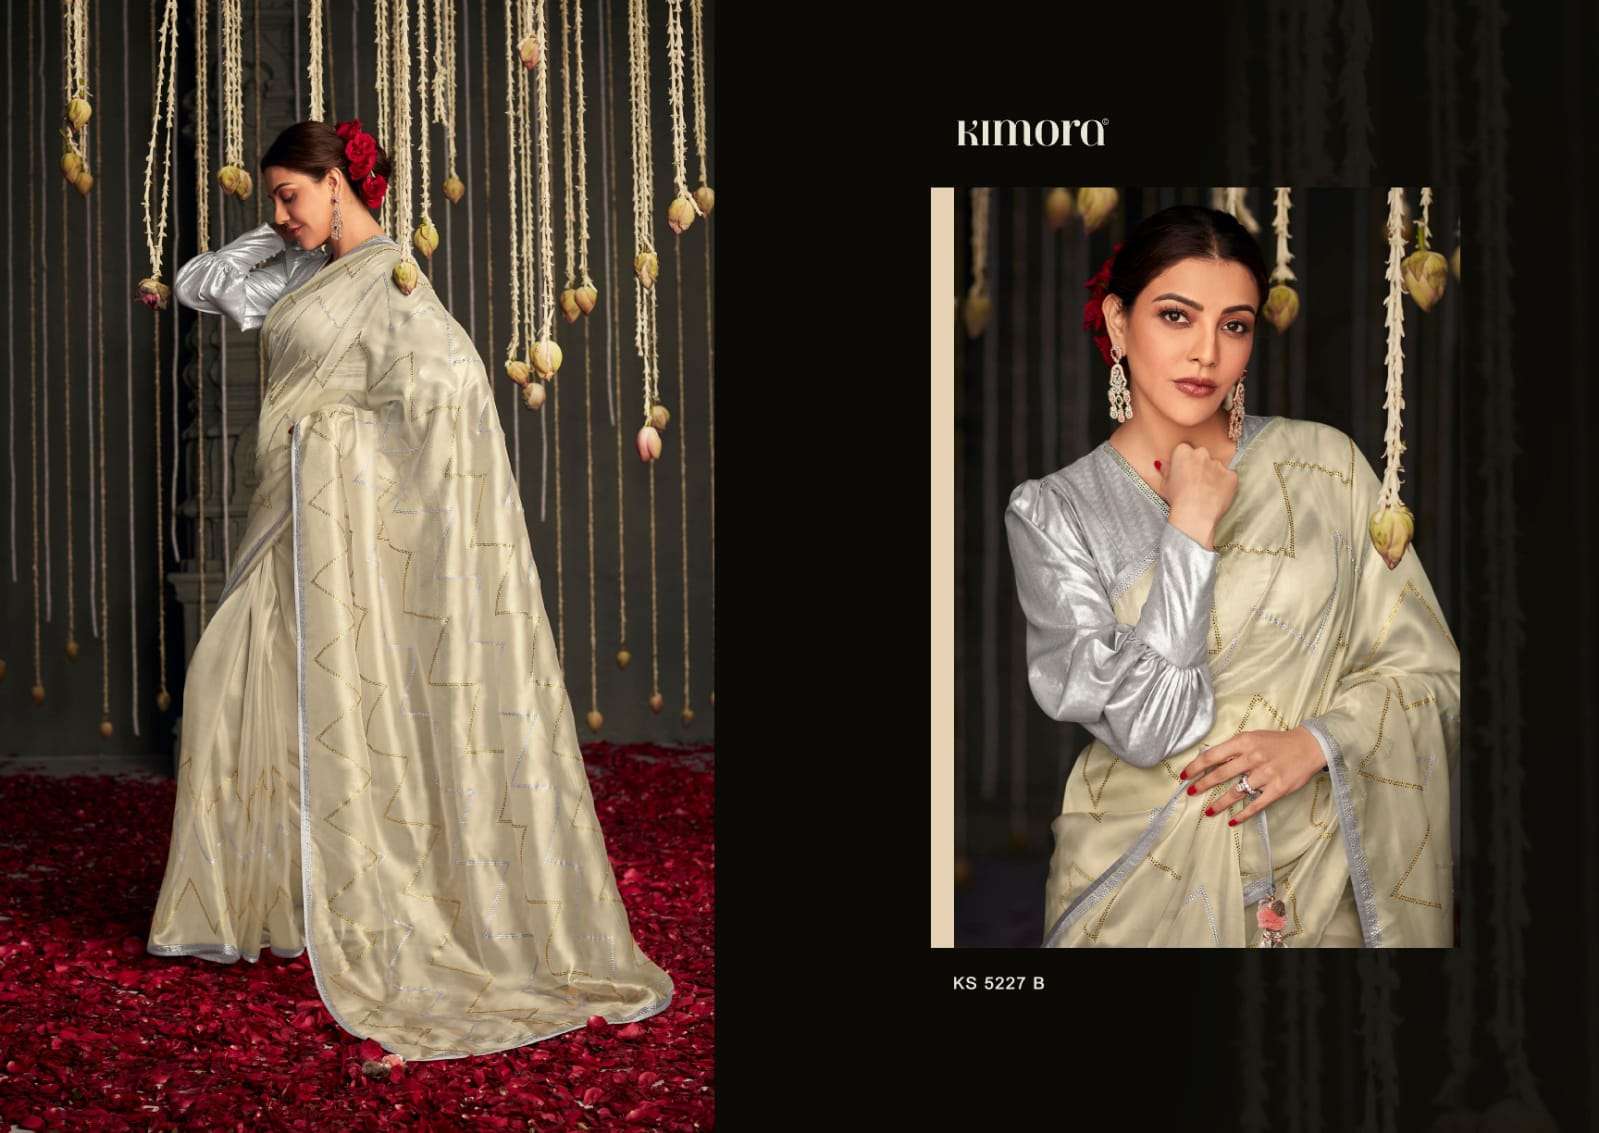 Kajal And Kimora Hits By Kimora Fashion 5227 To 5227-D Series Indian Traditional Wear Collection Beautiful Stylish Fancy Colorful Party Wear & Occasional Wear Fancy Sarees At Wholesale Price